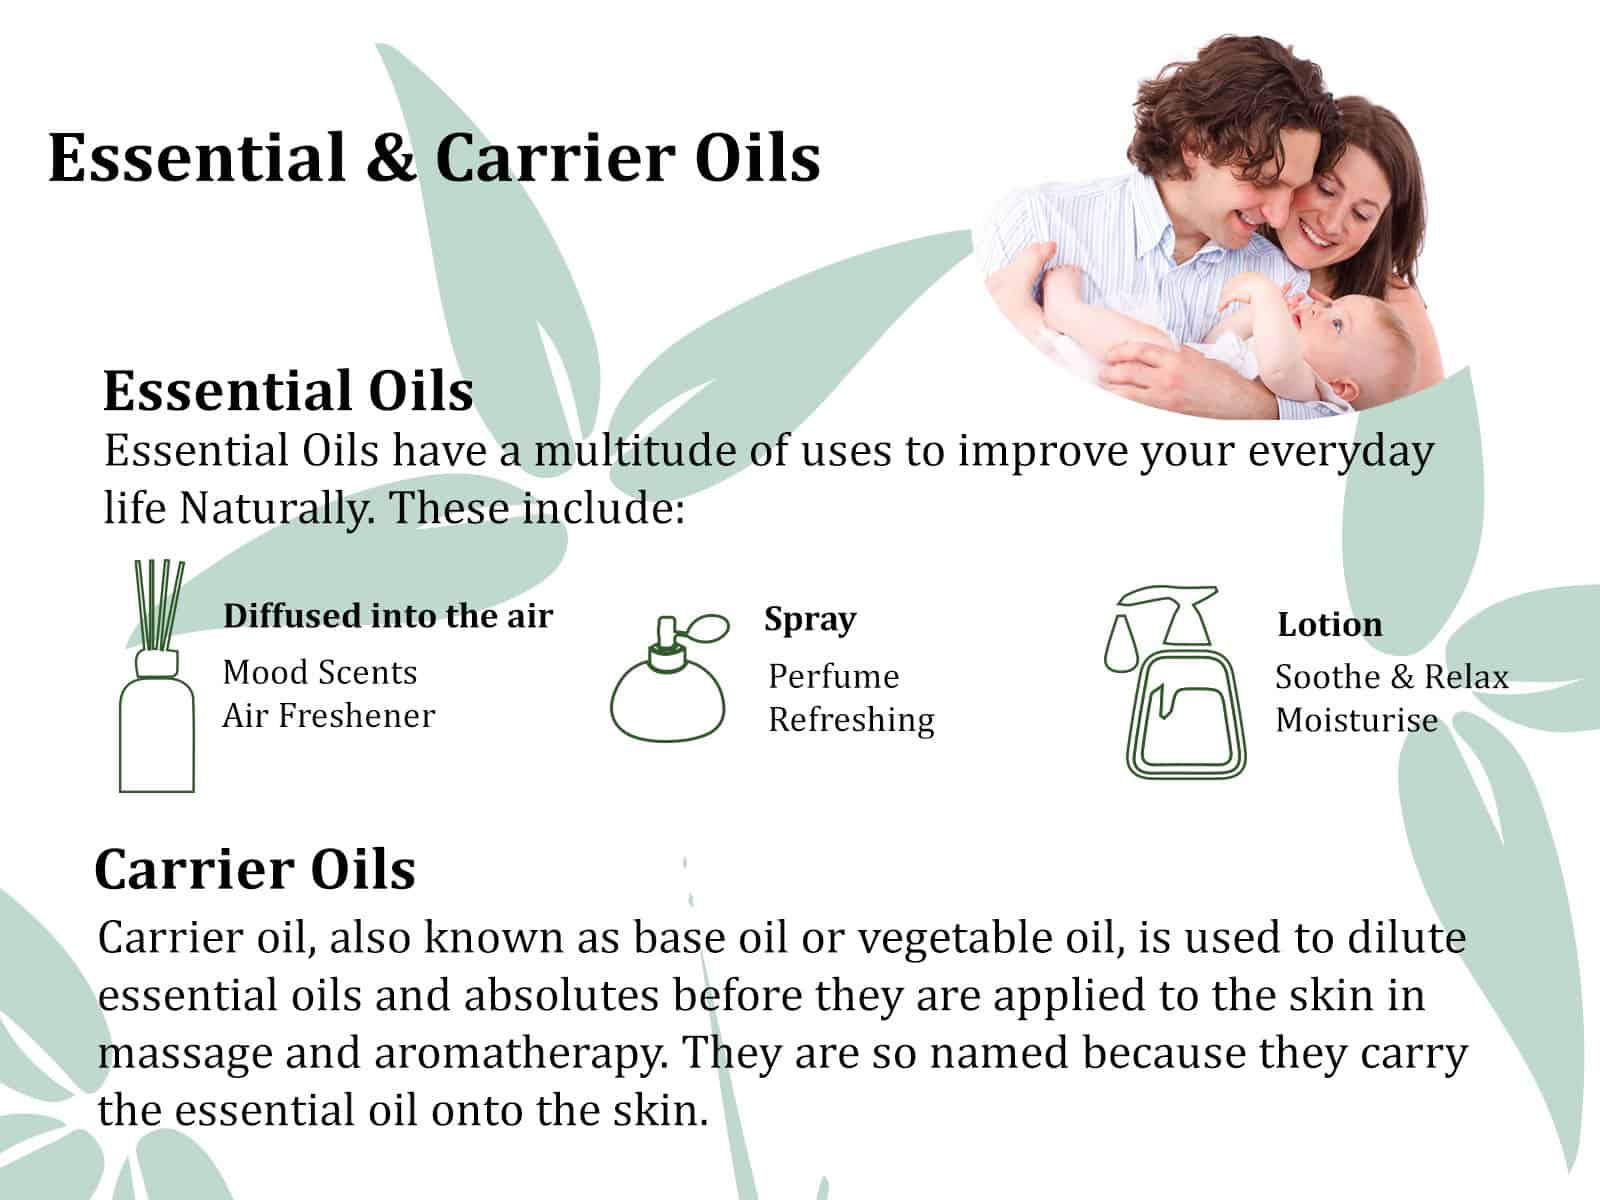 Uses of essential oils and carrier oils